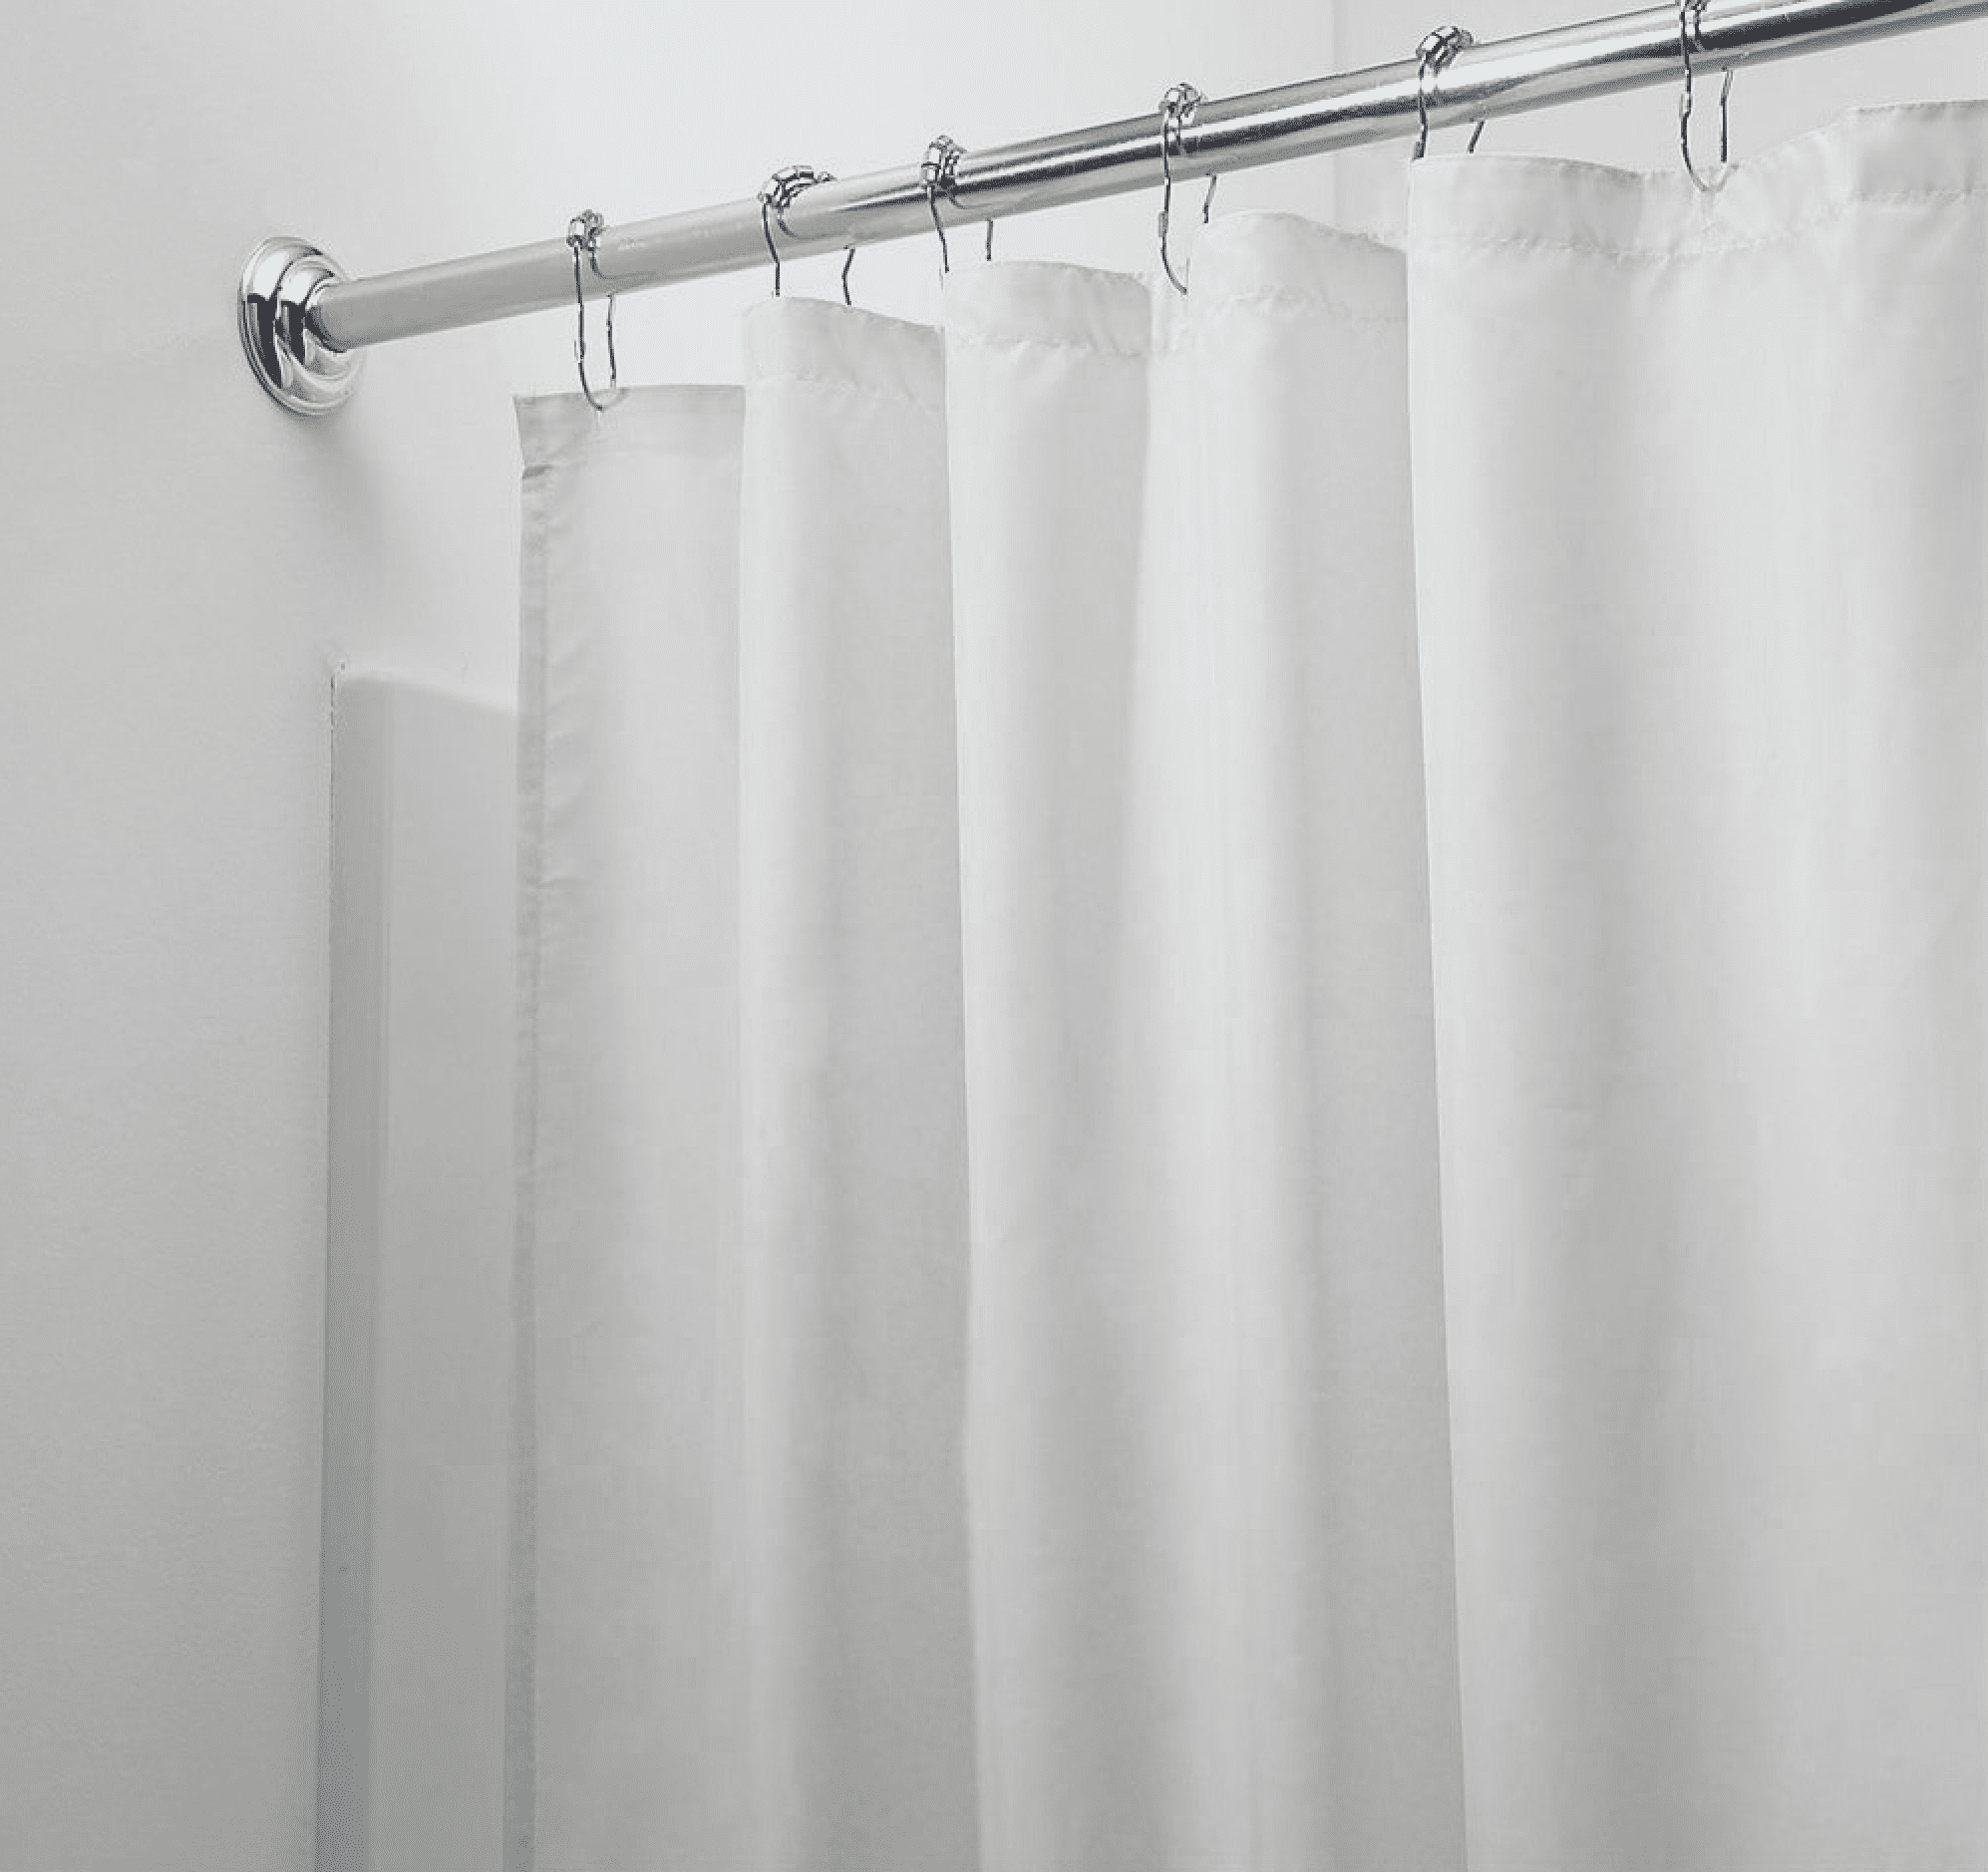 Mold Mildew Resistant Fabric Shower, How Do You Clean A Fabric Shower Curtain Liner